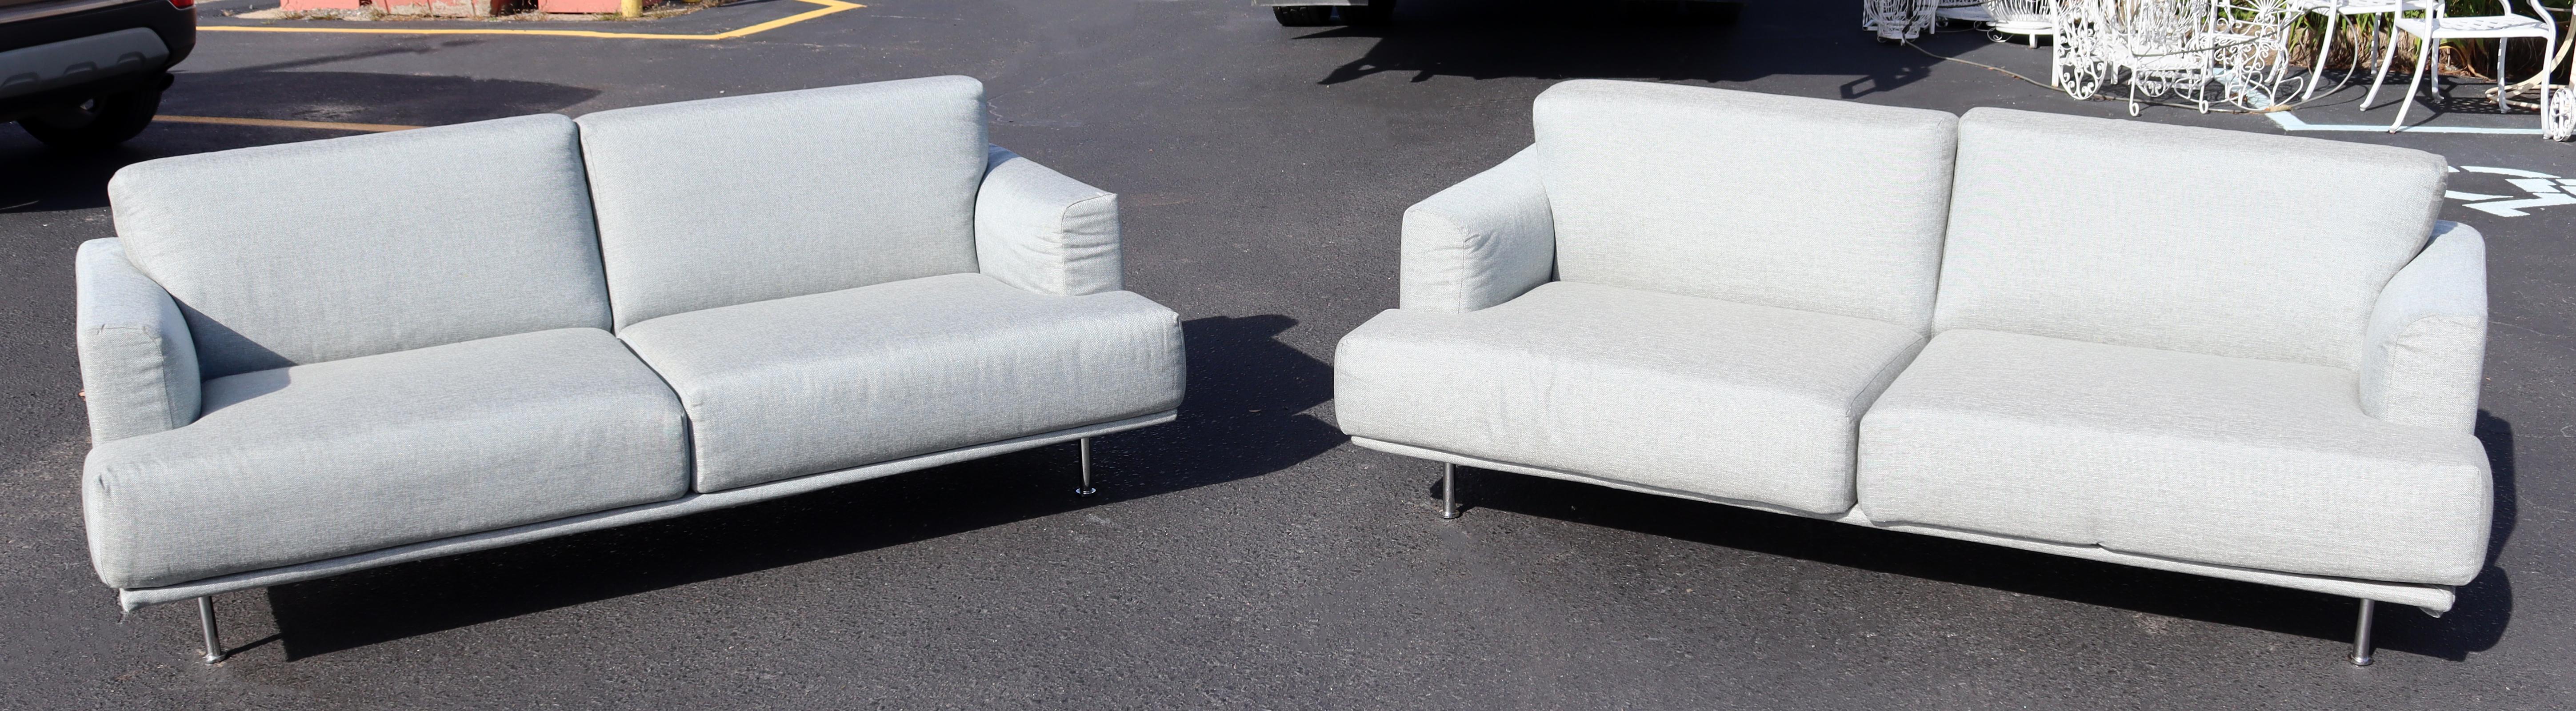 For your consideration is a perfect pair of Nest sofas, with a dove gray upholstery on tubular chrome bases, made in the Italy, by Piero Lissoni for Cassina, circa the 1990s. In excellent condition. The dimensions of each are 77